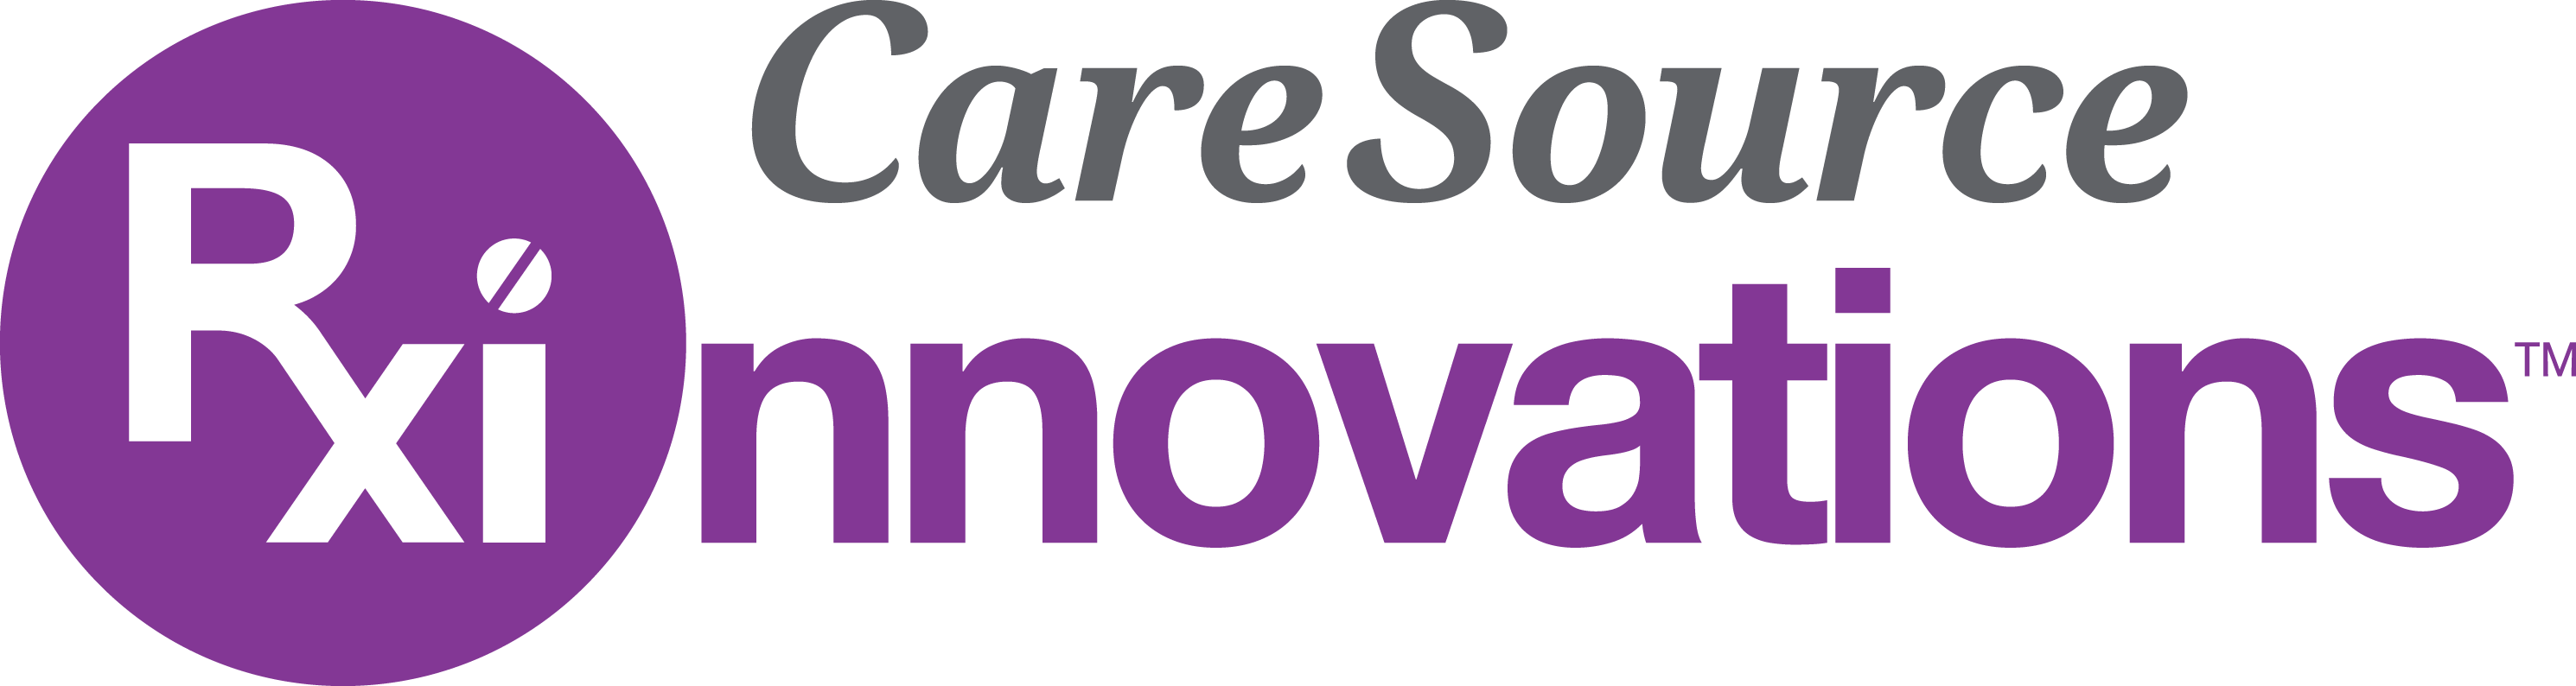 Caresource marketplace login conduent office locations in illinois